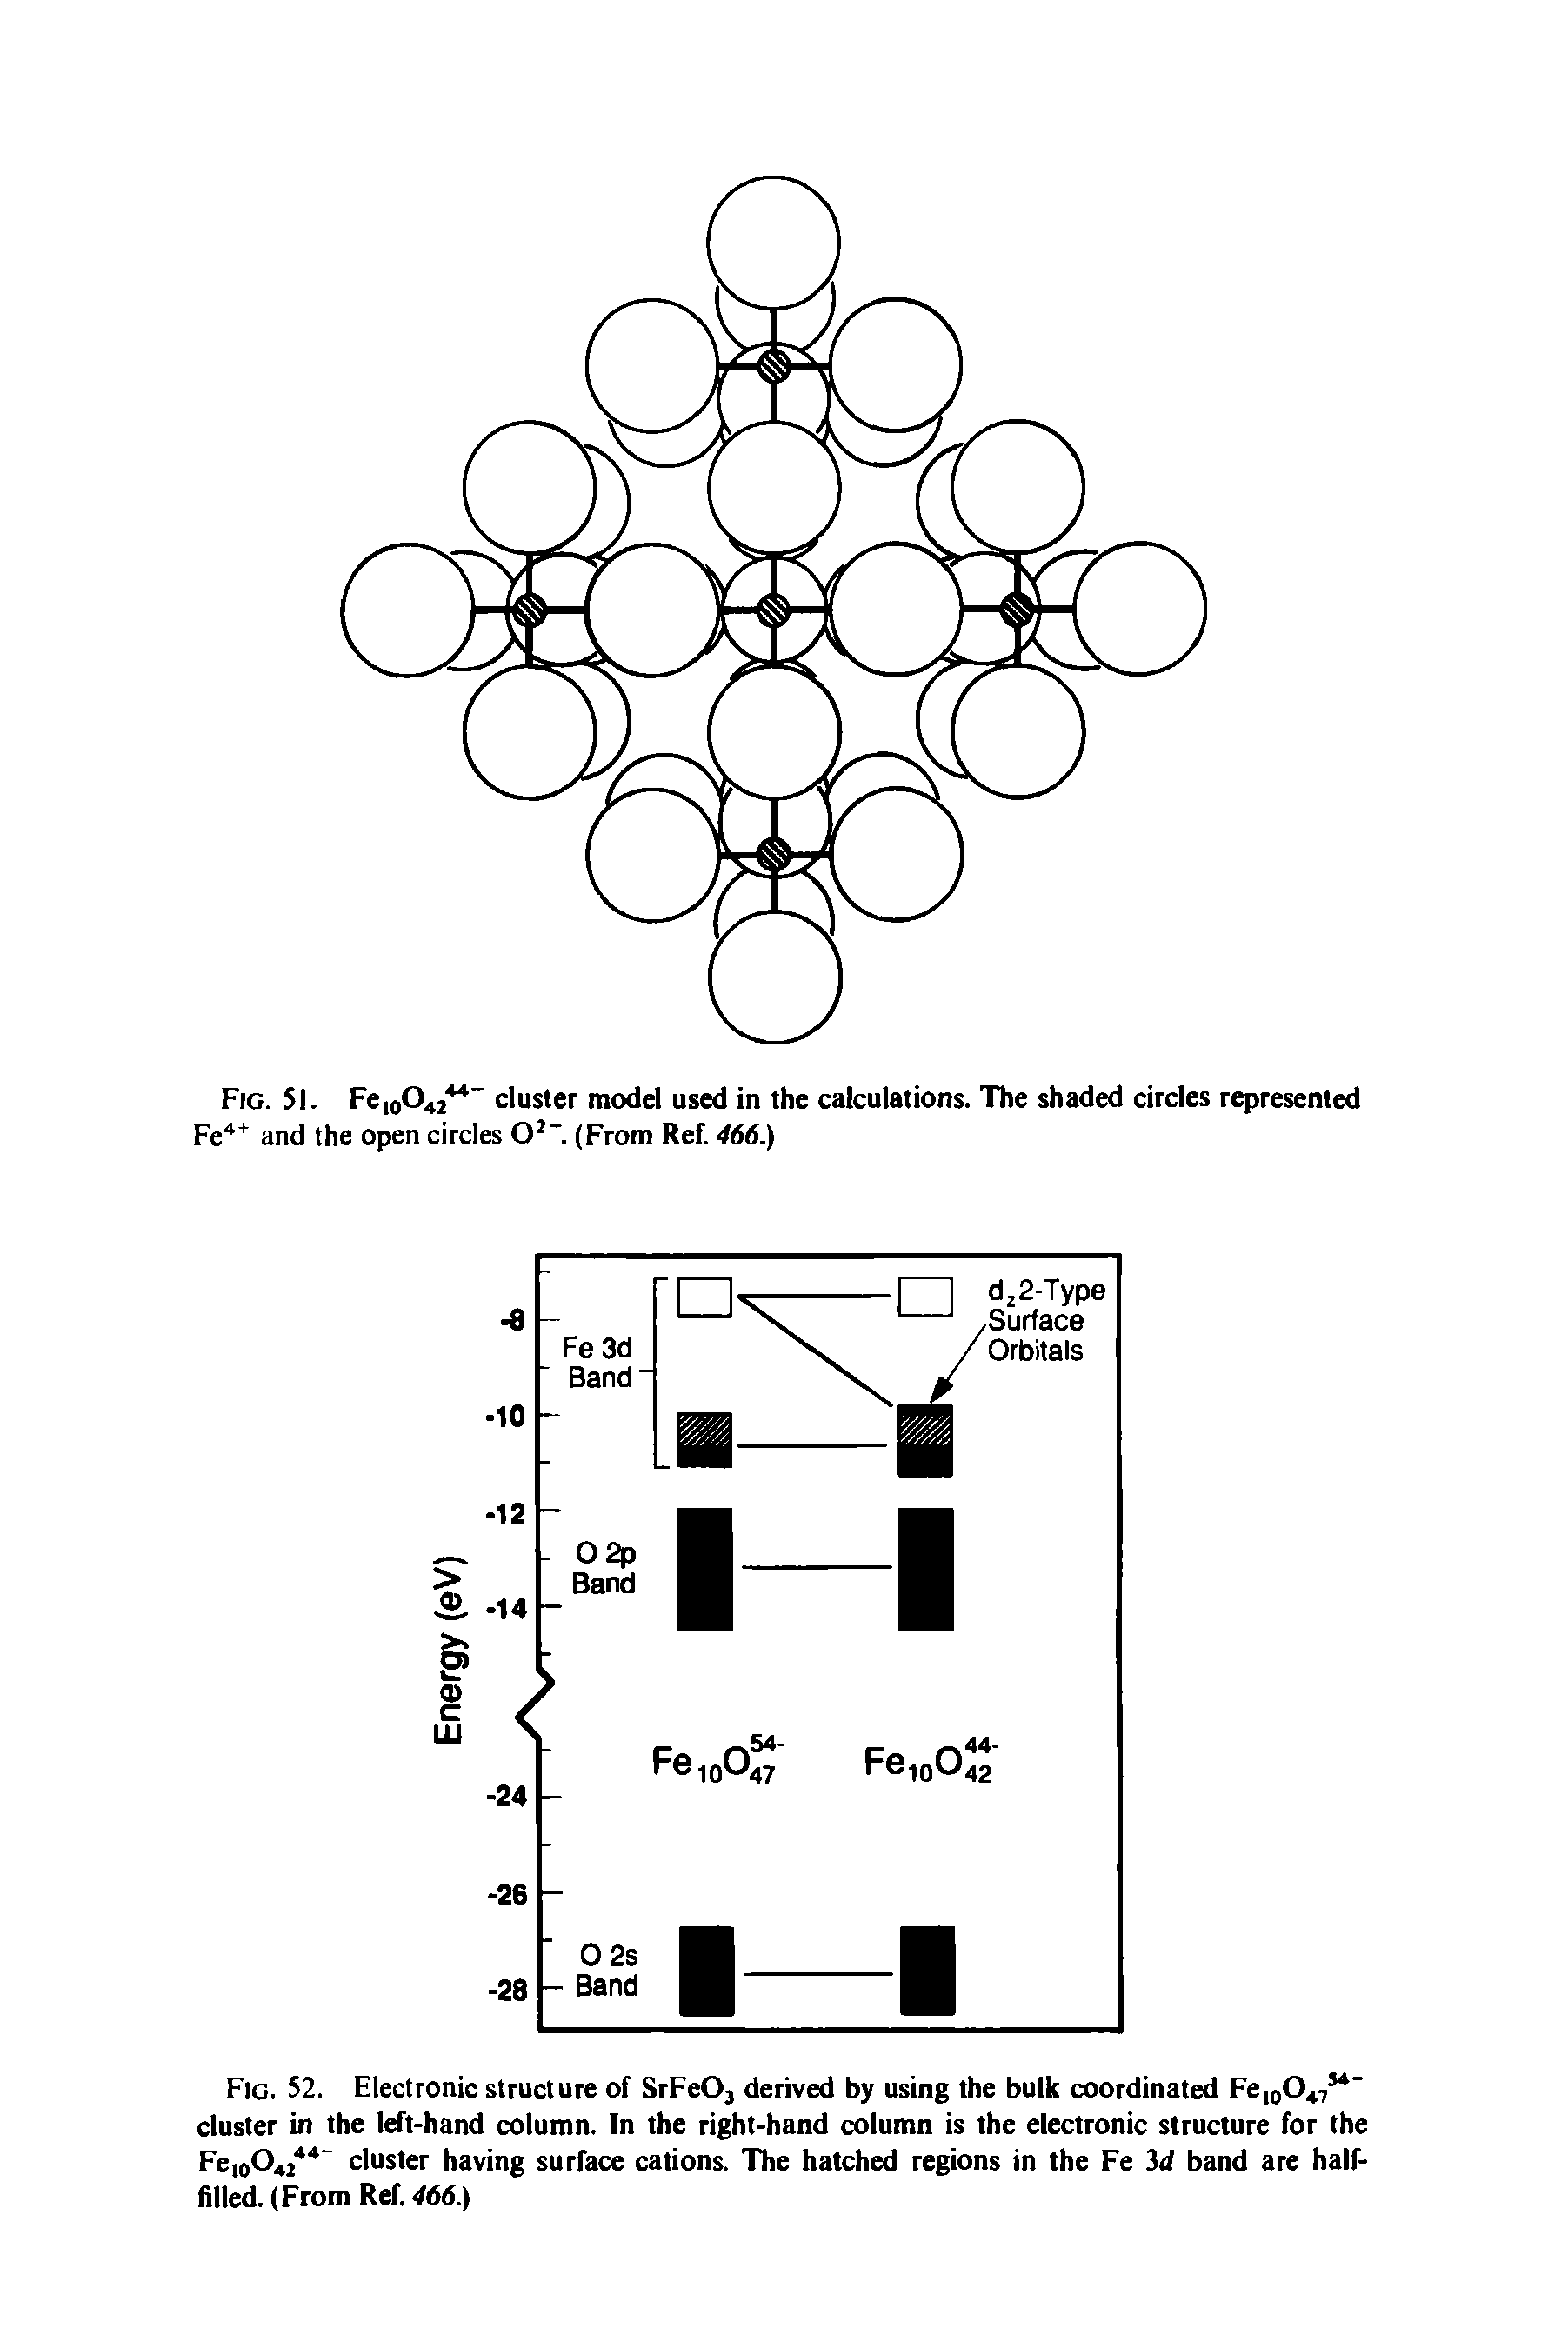 Fig. 52. Electronic structure of SrFeOj derived by using the bulk coordinated Fe,o047 " cluster in the left-hand column. In the right-hand column is the electronic structure for the Feio042 cluster having surface cations. The hatched regions in the Fe id band are half-filled. (From Ref 466.)...